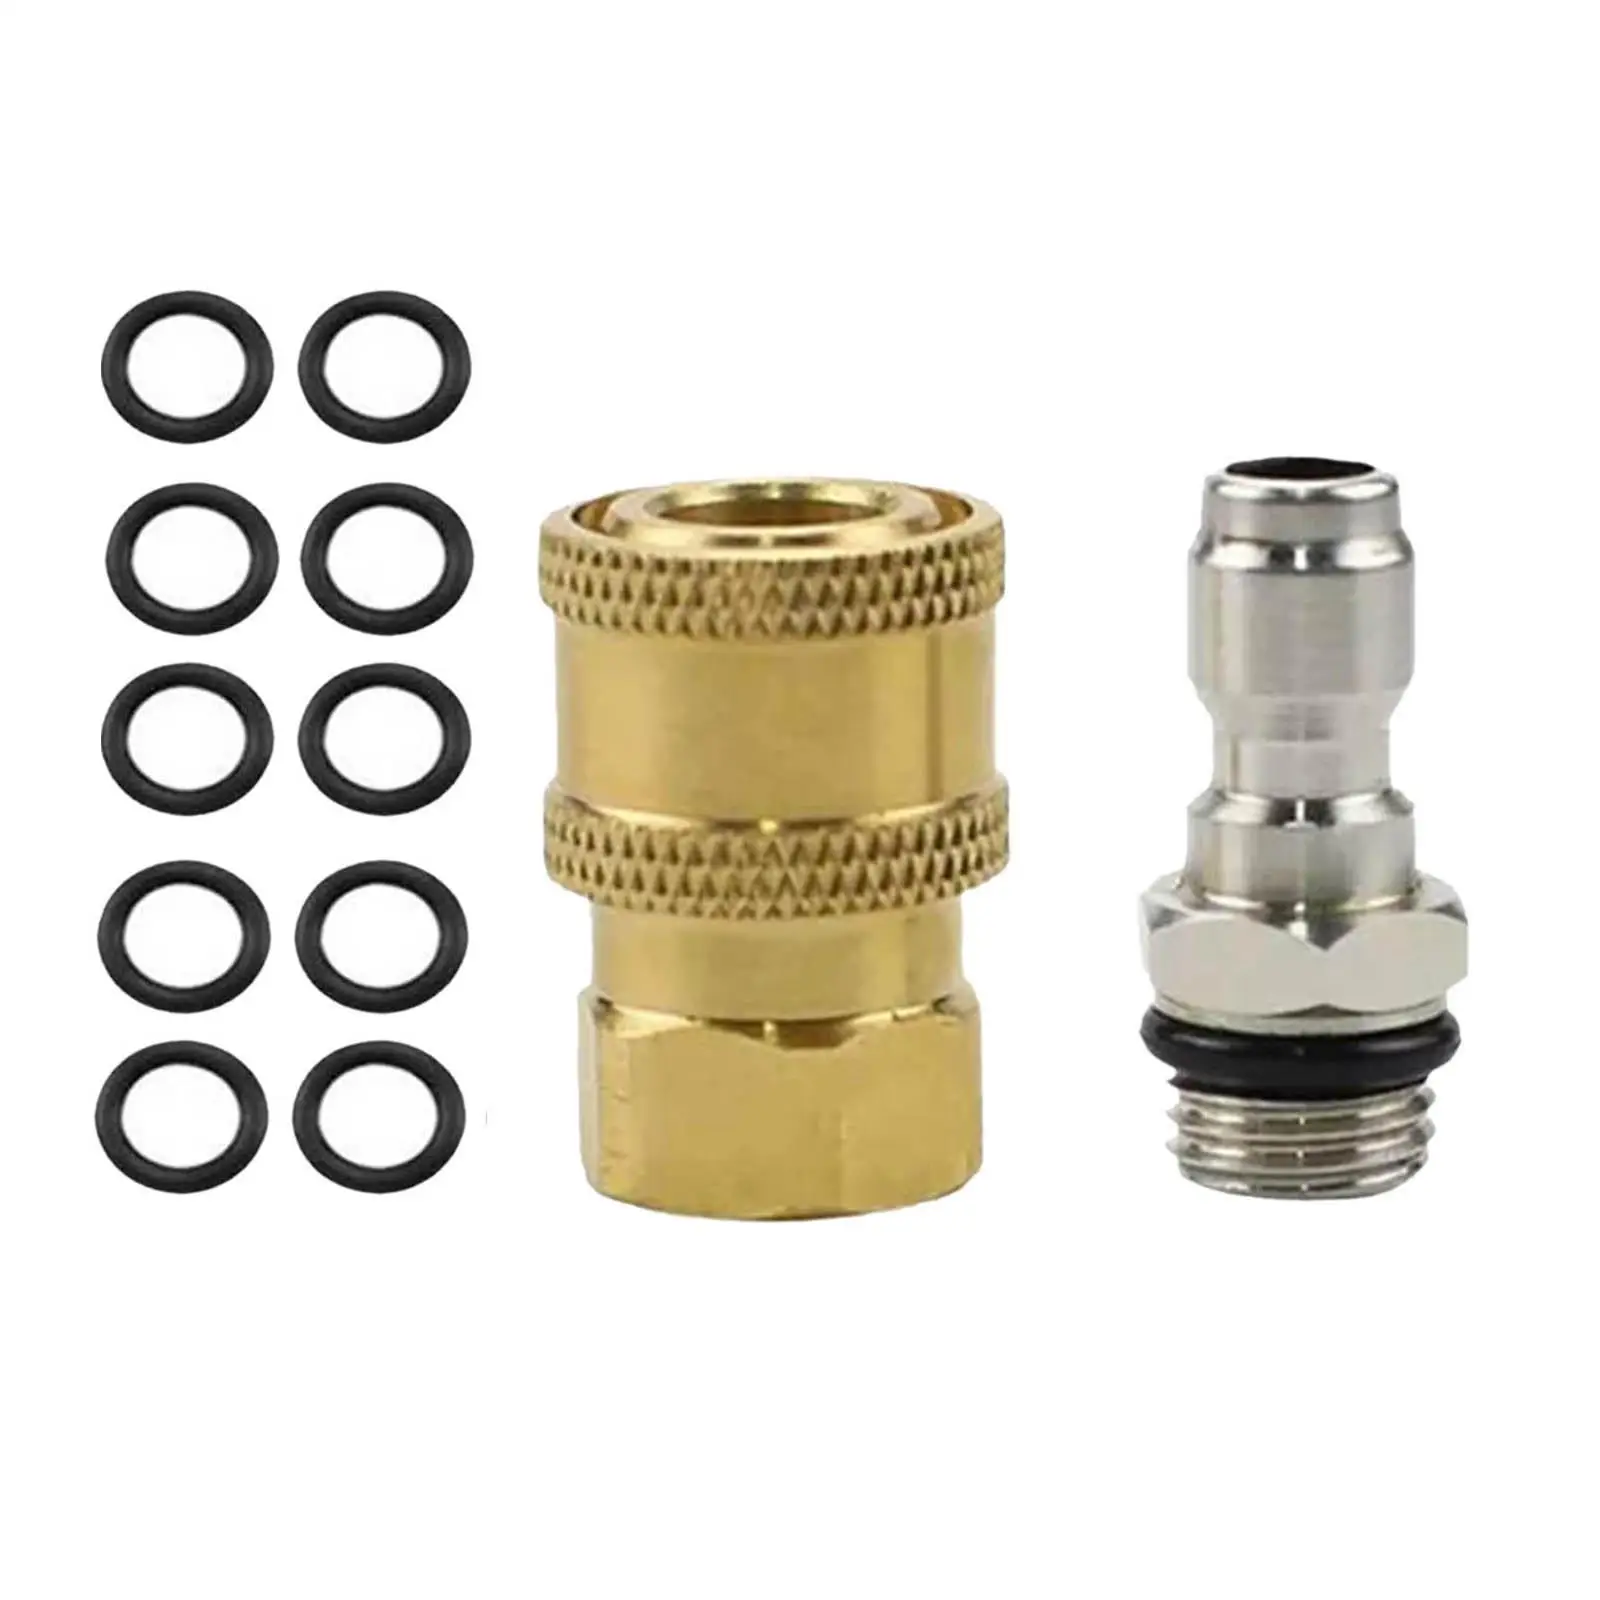 1/4 Inches Quick Disconnect Kit Quick Coupler Fittings Connect and Disconnect Pressure Washer Adapter Set